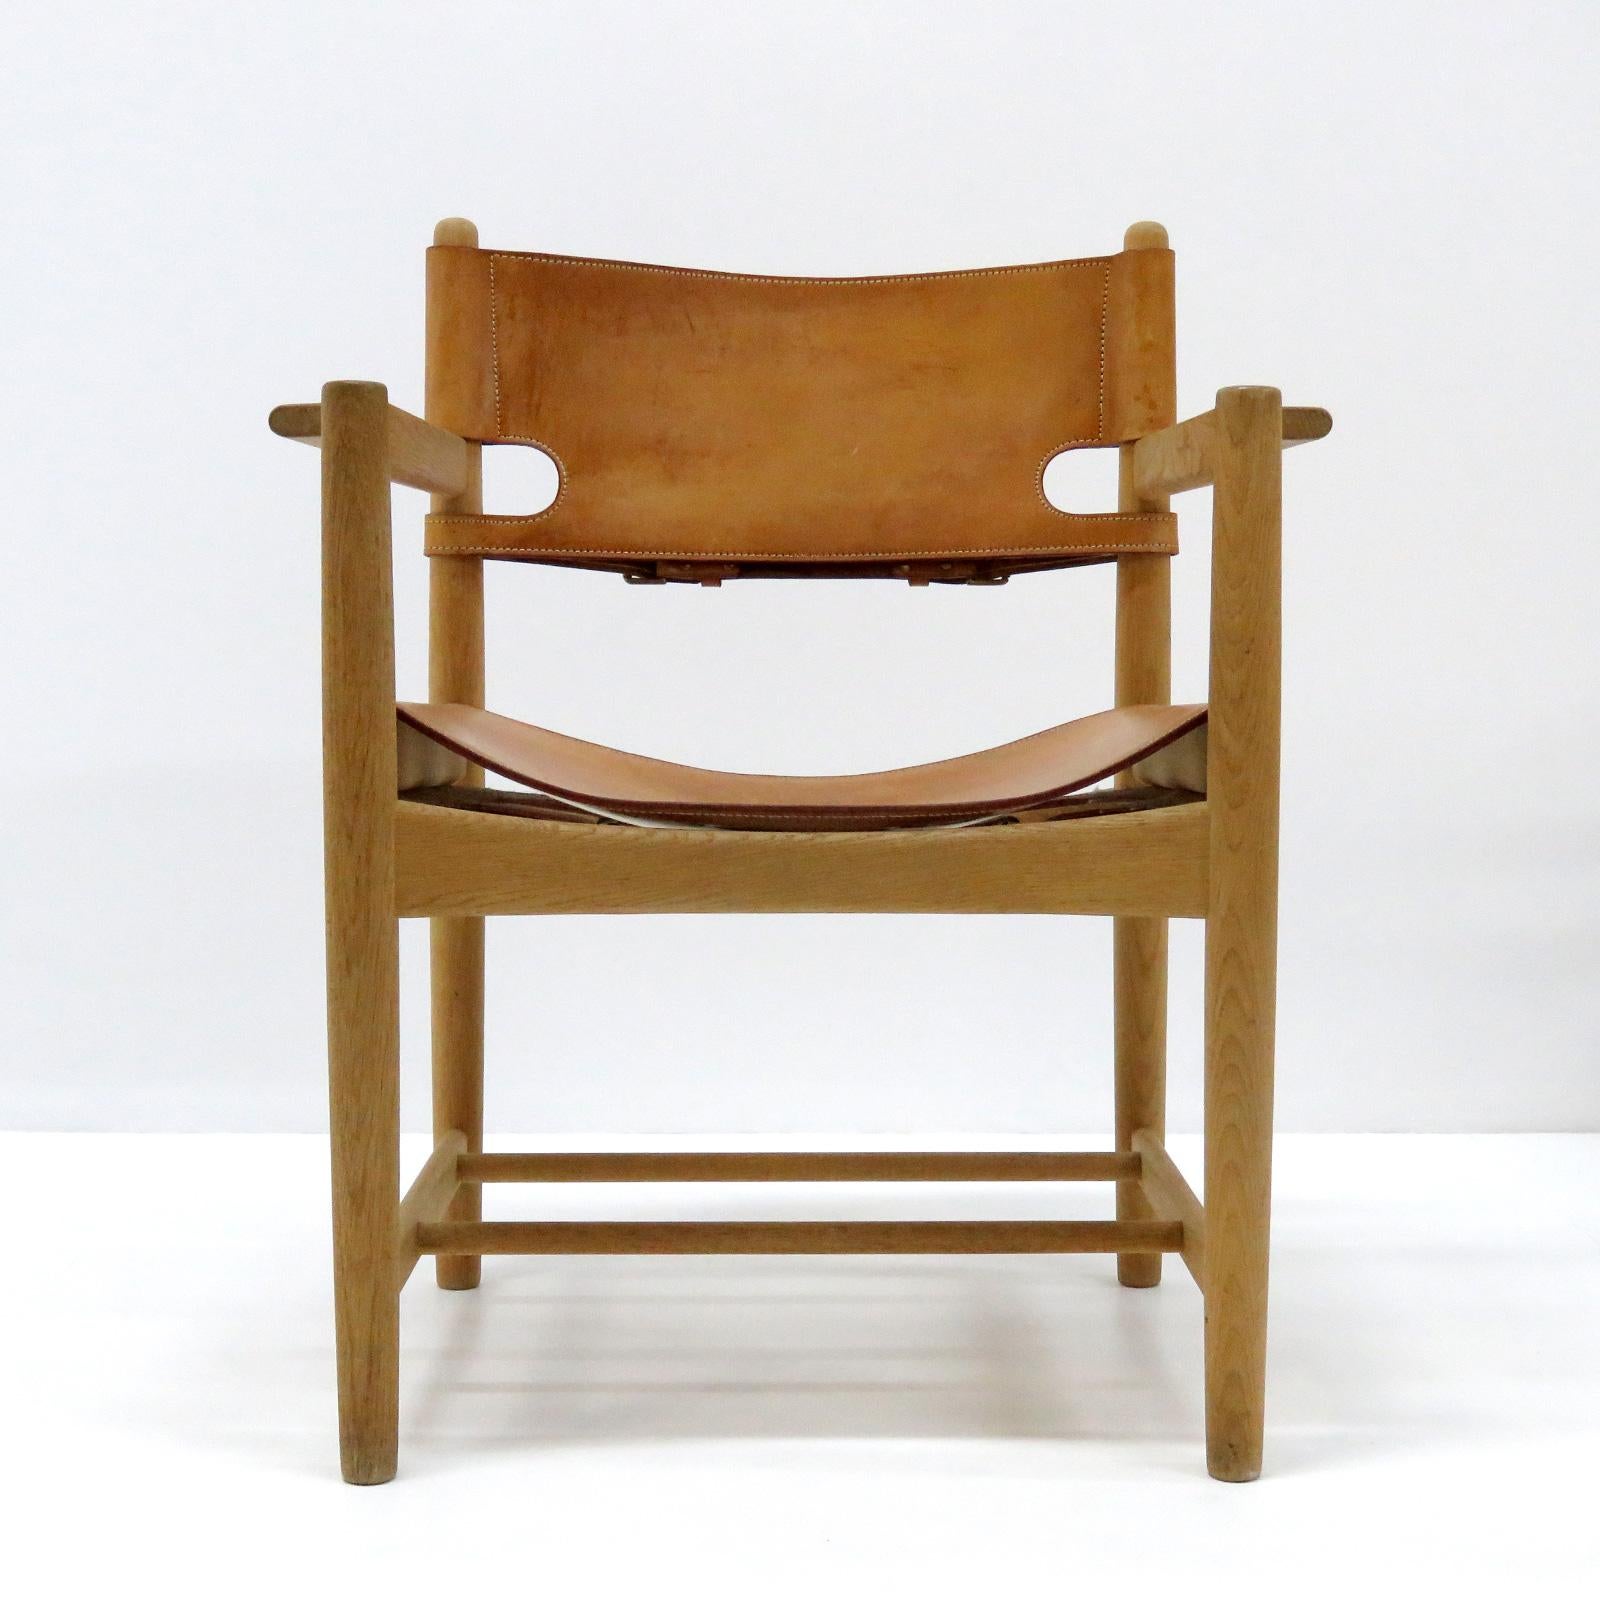 Wonderful pair of Børge Mogensen 'Hunting' chairs, model no. 3238 for Fredericia Furniture, with saddle leather on oak frames, great patina, part of a set of 10 chairs, partially marked.